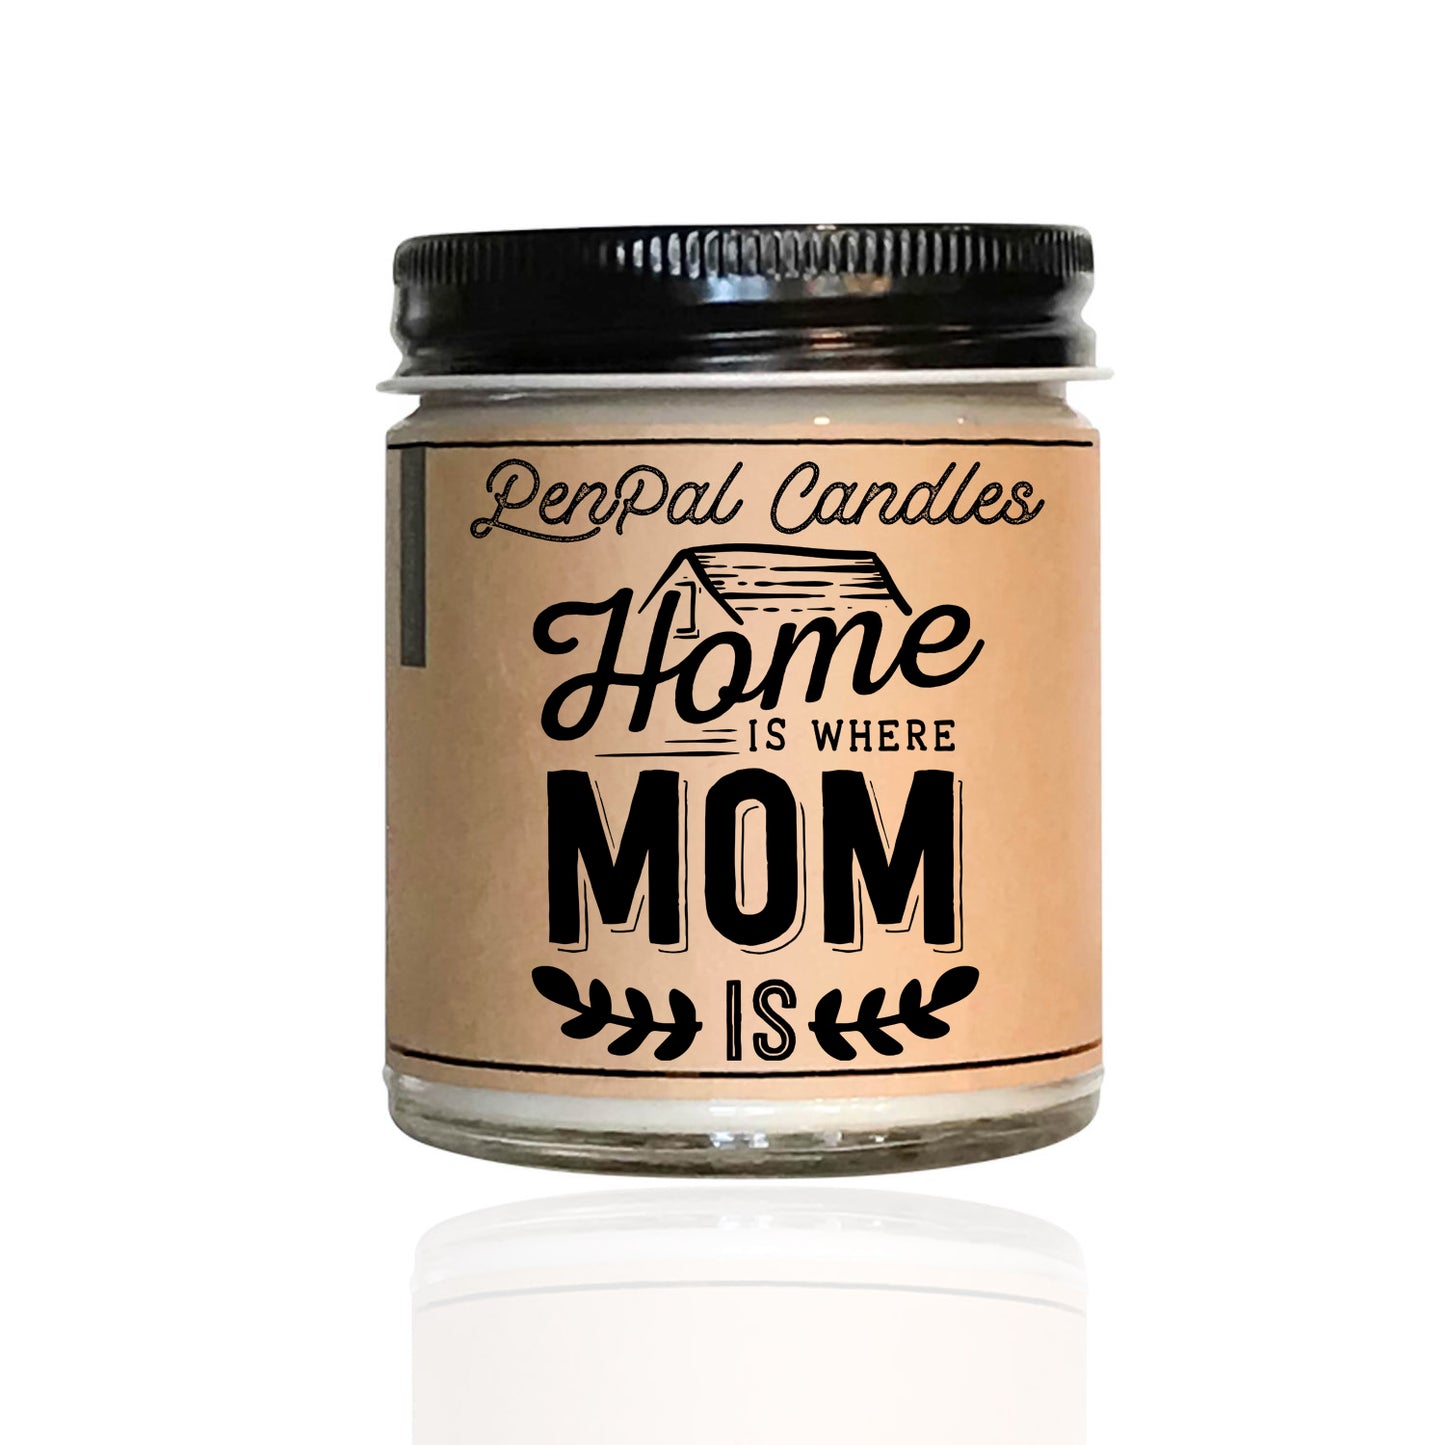 Home is where mom is - scented soy candle